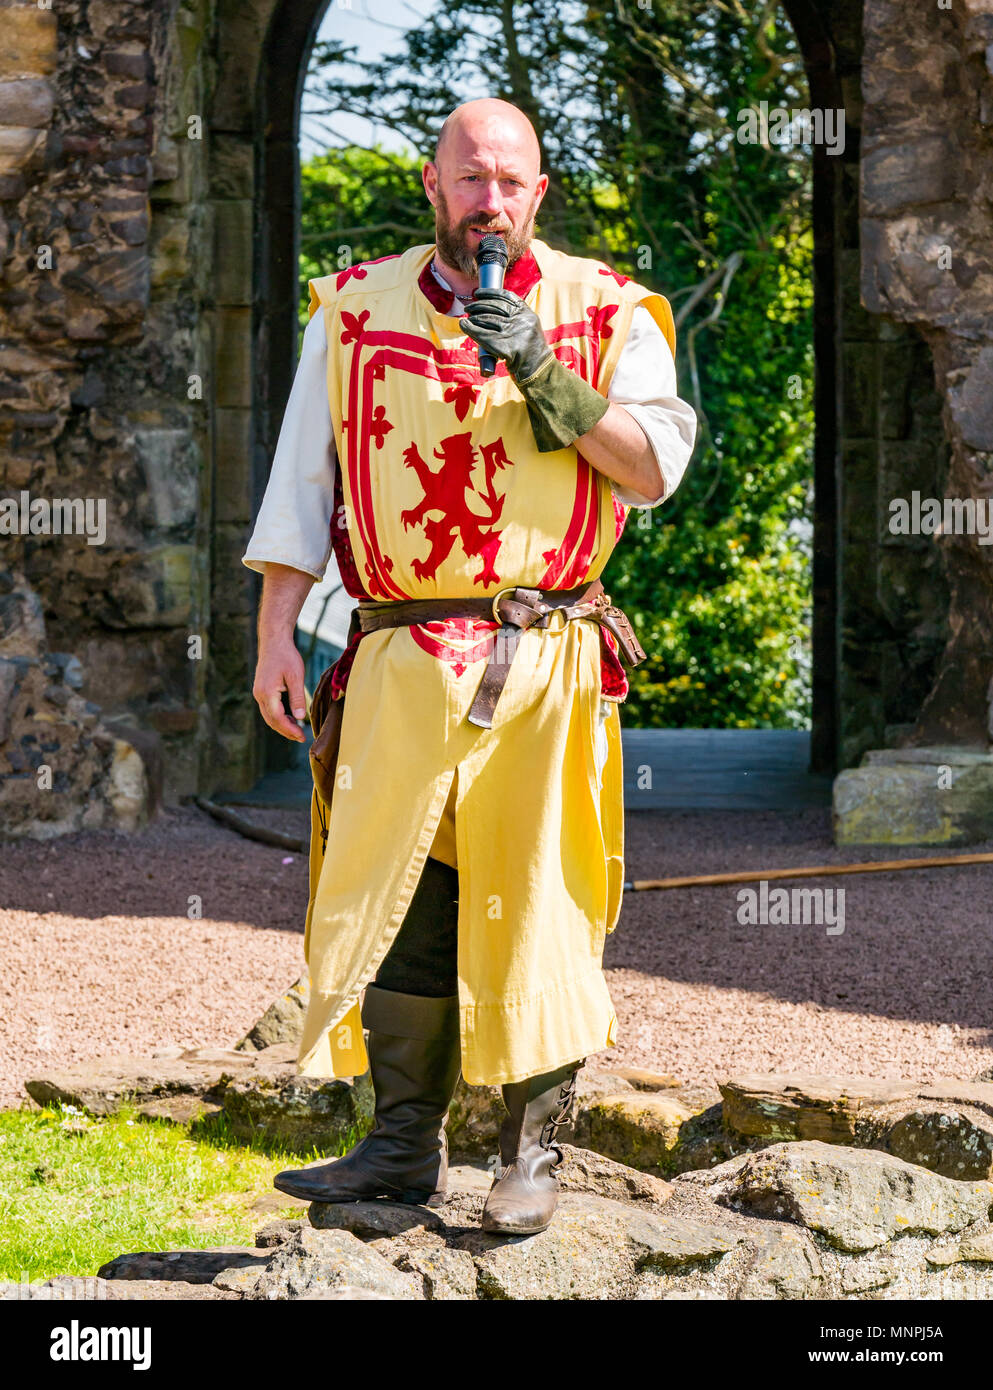 Dirleton, East Lothian, Scotland, UK, 19th May 2018.  Dirleton, East Lothian, Scotland, UK, 19th May 2018.  Dirleton Castle attack re-enactment. The Historic Saltire Society staging a tongue-in-cheek re-enactment of an attack by Robert the Bruce, King of Scotland, around 1311, to take the castle from the English, dressed in authentic clothes and armour and wielding replica weapons in Historic Environment Scotland's Dirleton Castle. A man playing Robert the Bruce dressed in costume with a lion rampant. Stock Photo